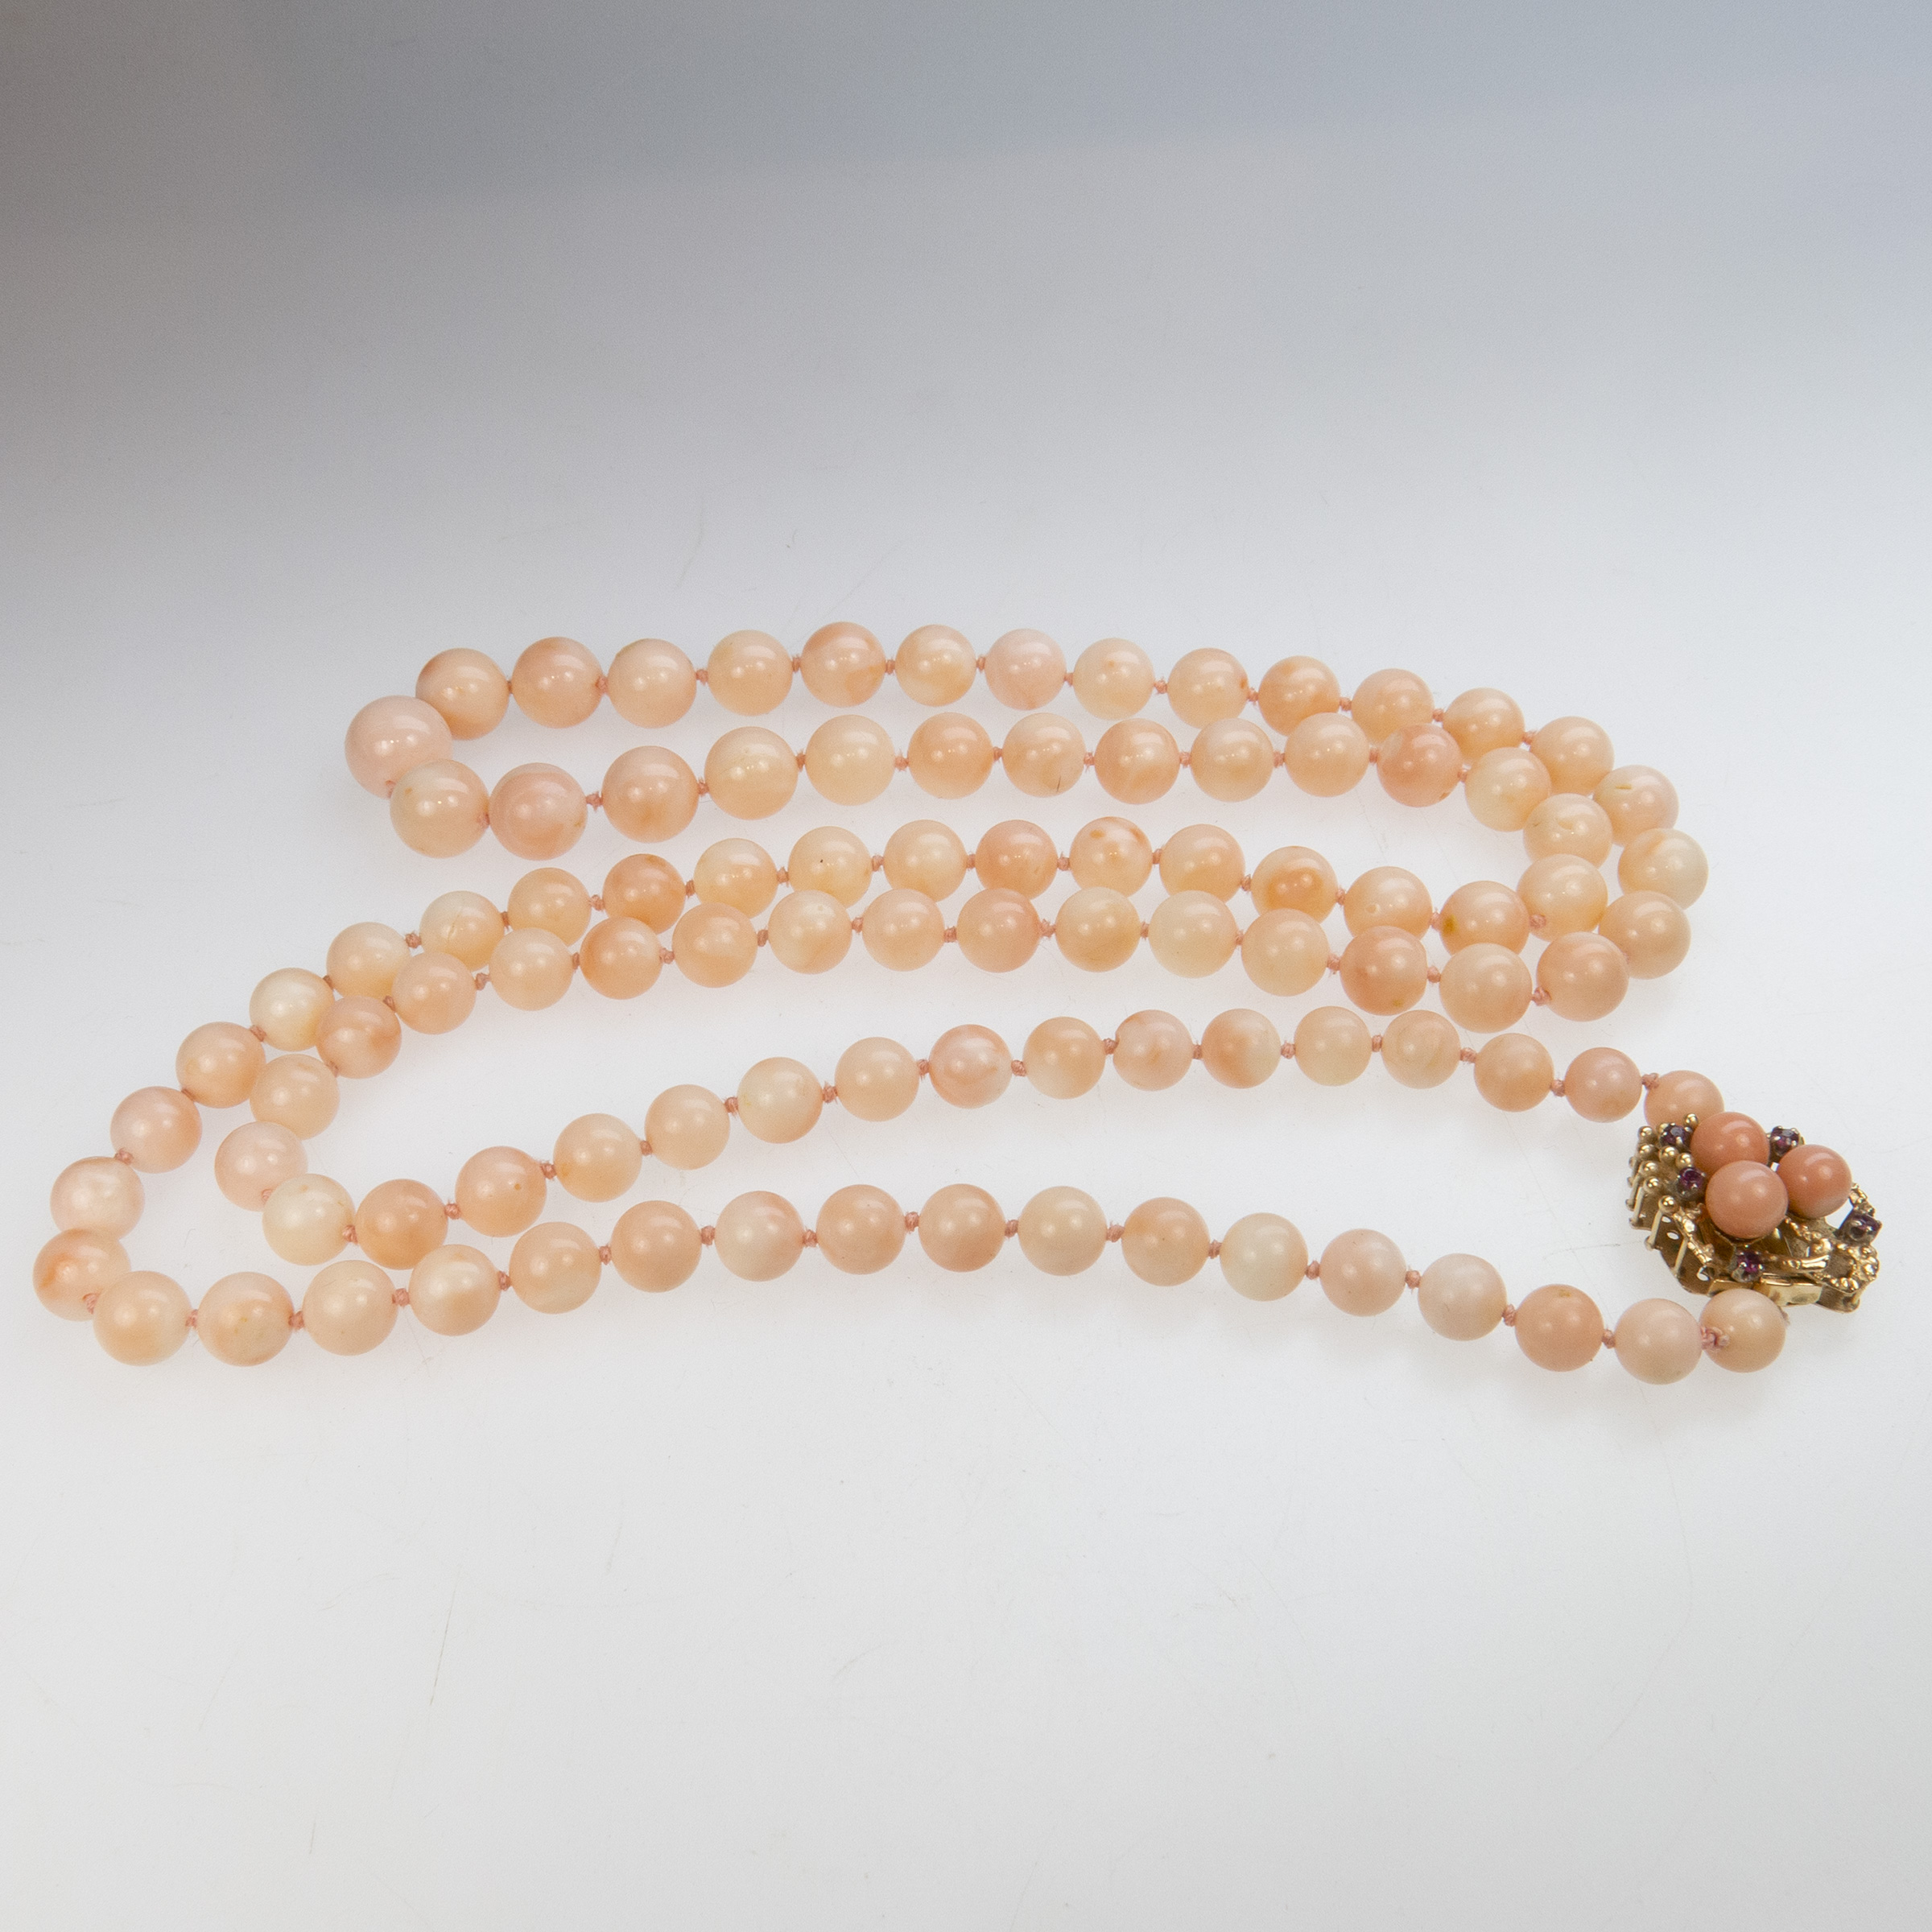 Single Graduated Strand Of Coral Beads